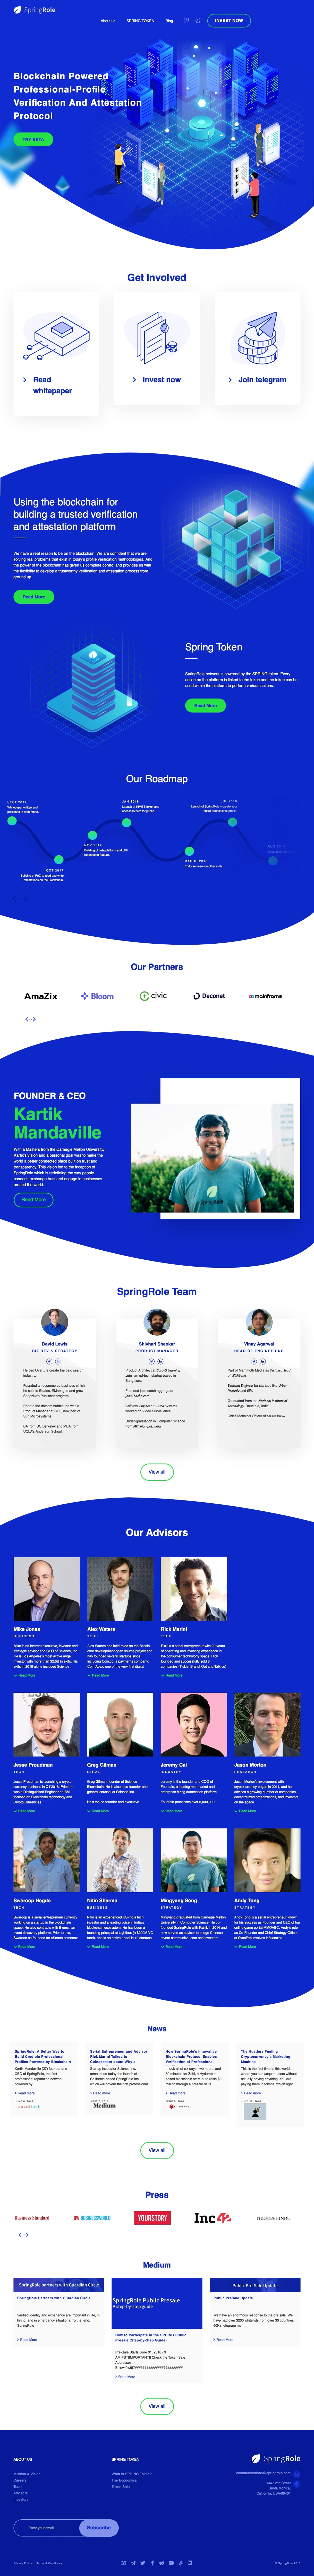 SpringRole Landing Page Example: Blockchain powered attestation protocol for verifying professional profiles.